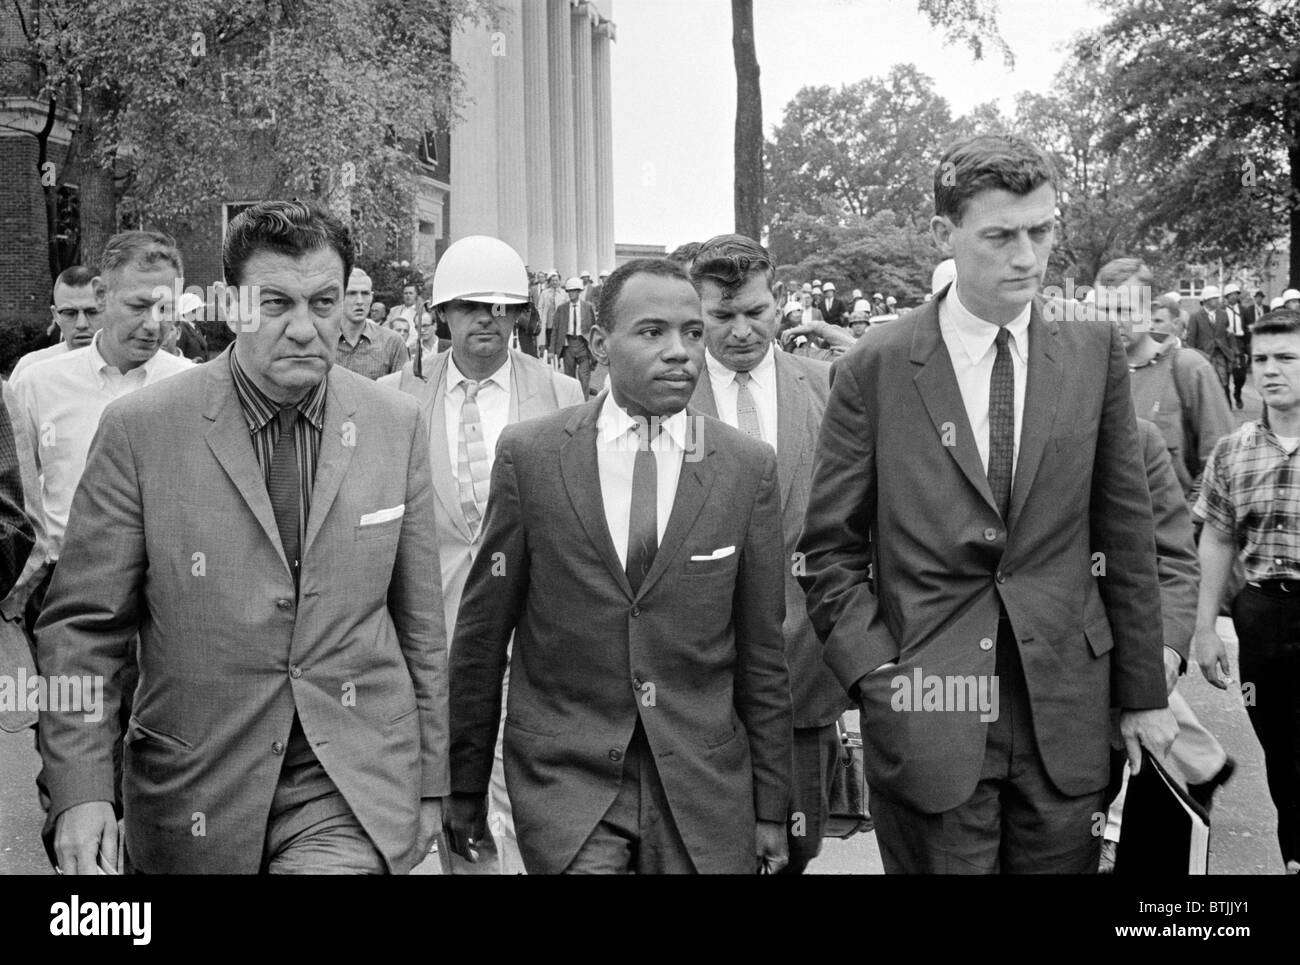 Integration at Ole Mississippi University, James Meredith (center), walking to class accompanied by U.S. marshals, by Marion S. Stock Photo